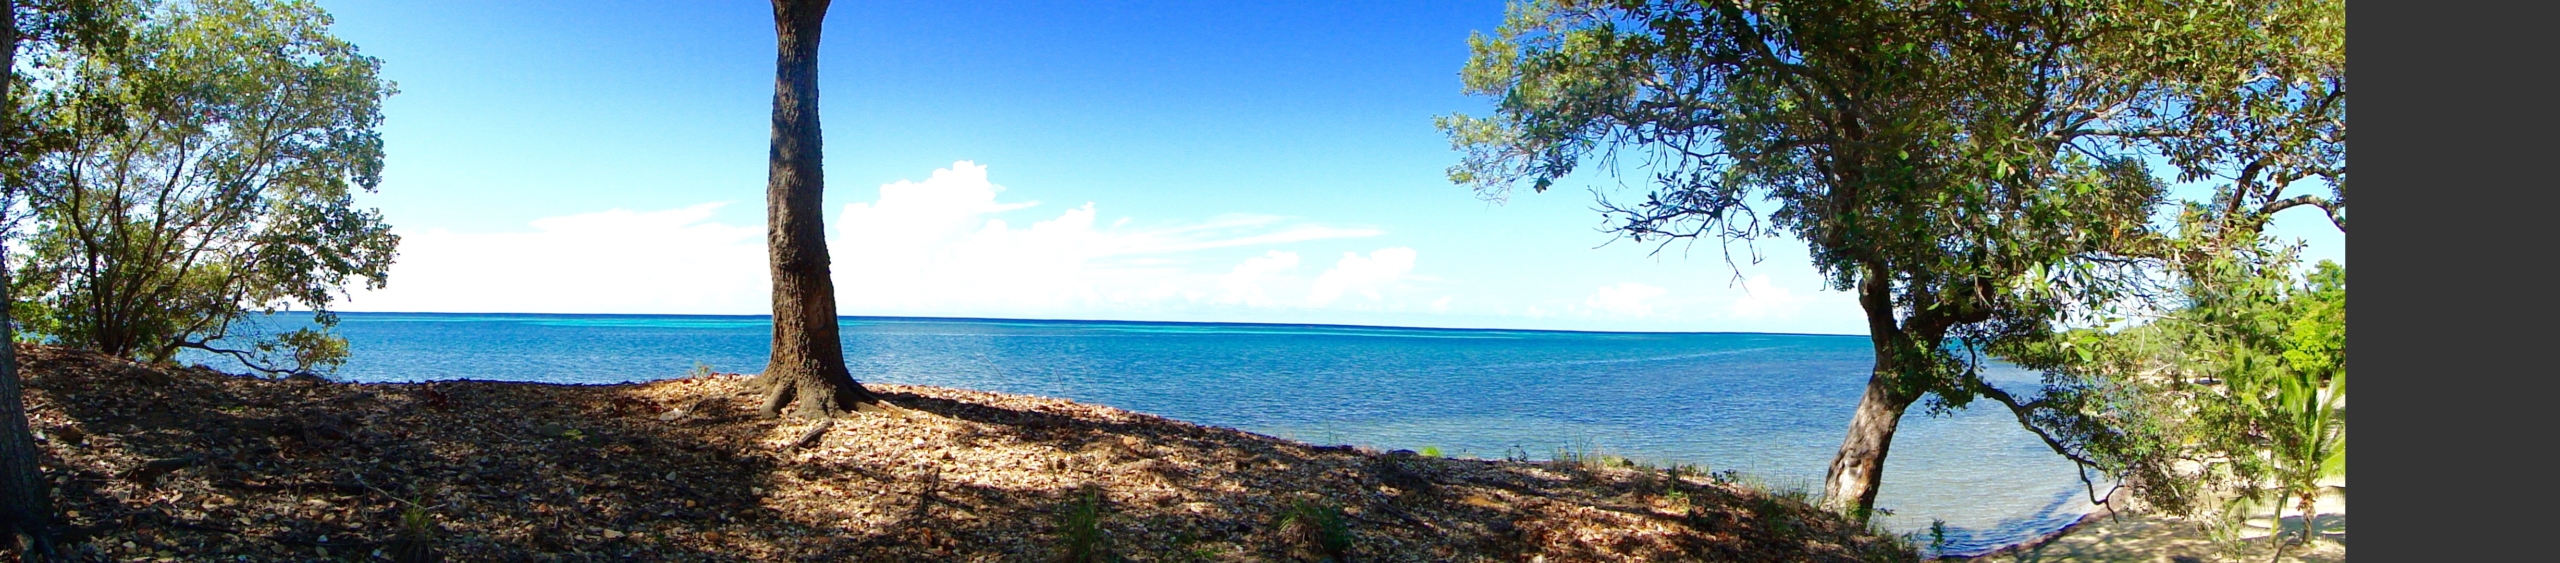 80 Acres With 2000 Foot Sand Beach Near Pristine Bay And The Black Pearl Golf Course - Roatan ...